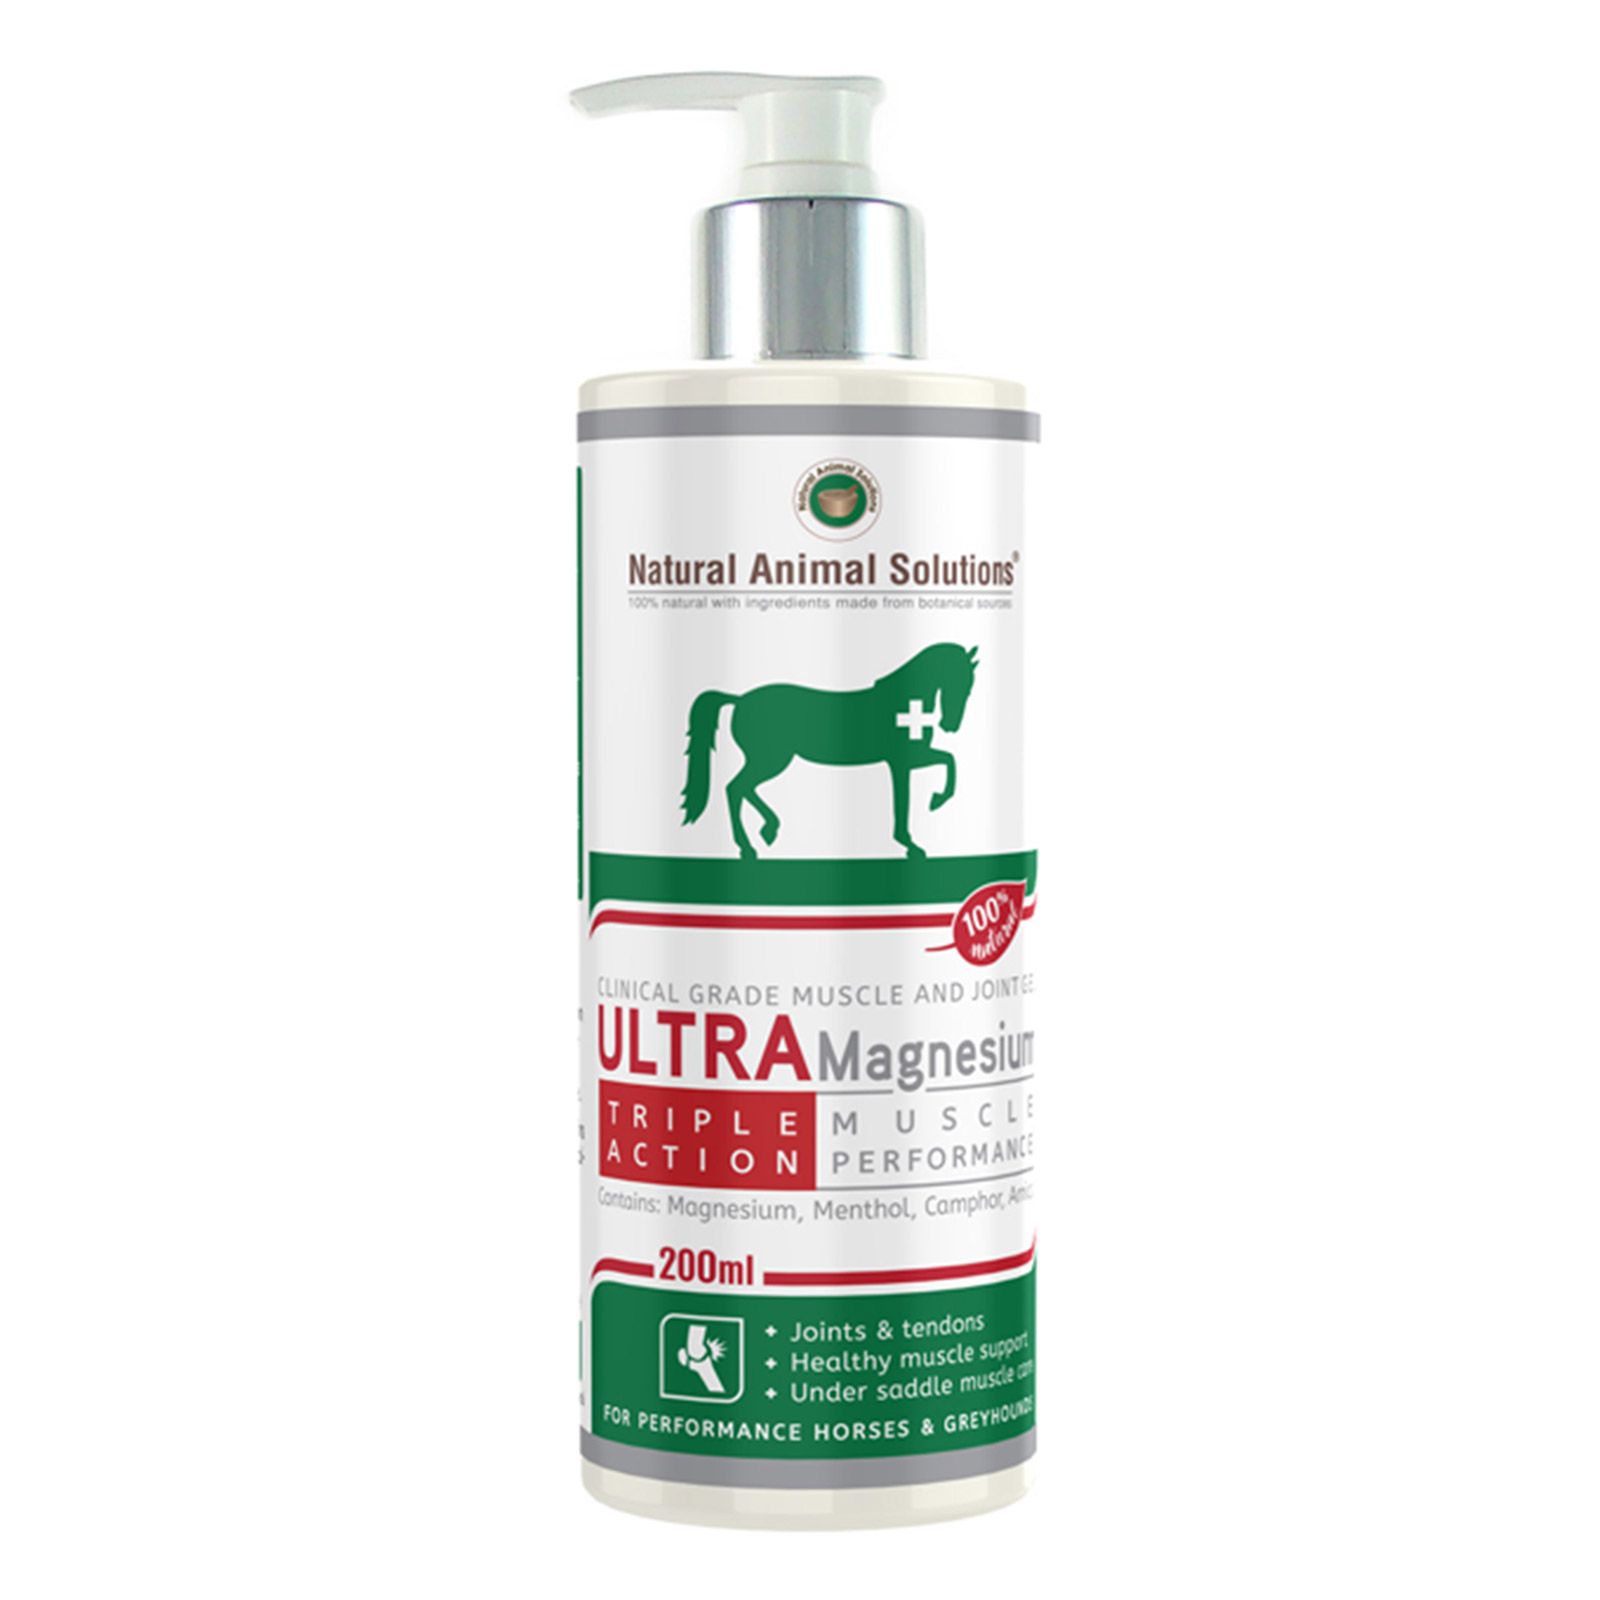 Natural Animal Solutions (NAS) Ultra Magnesium Muscle And Joint Care Gel for Horse and Greyhound